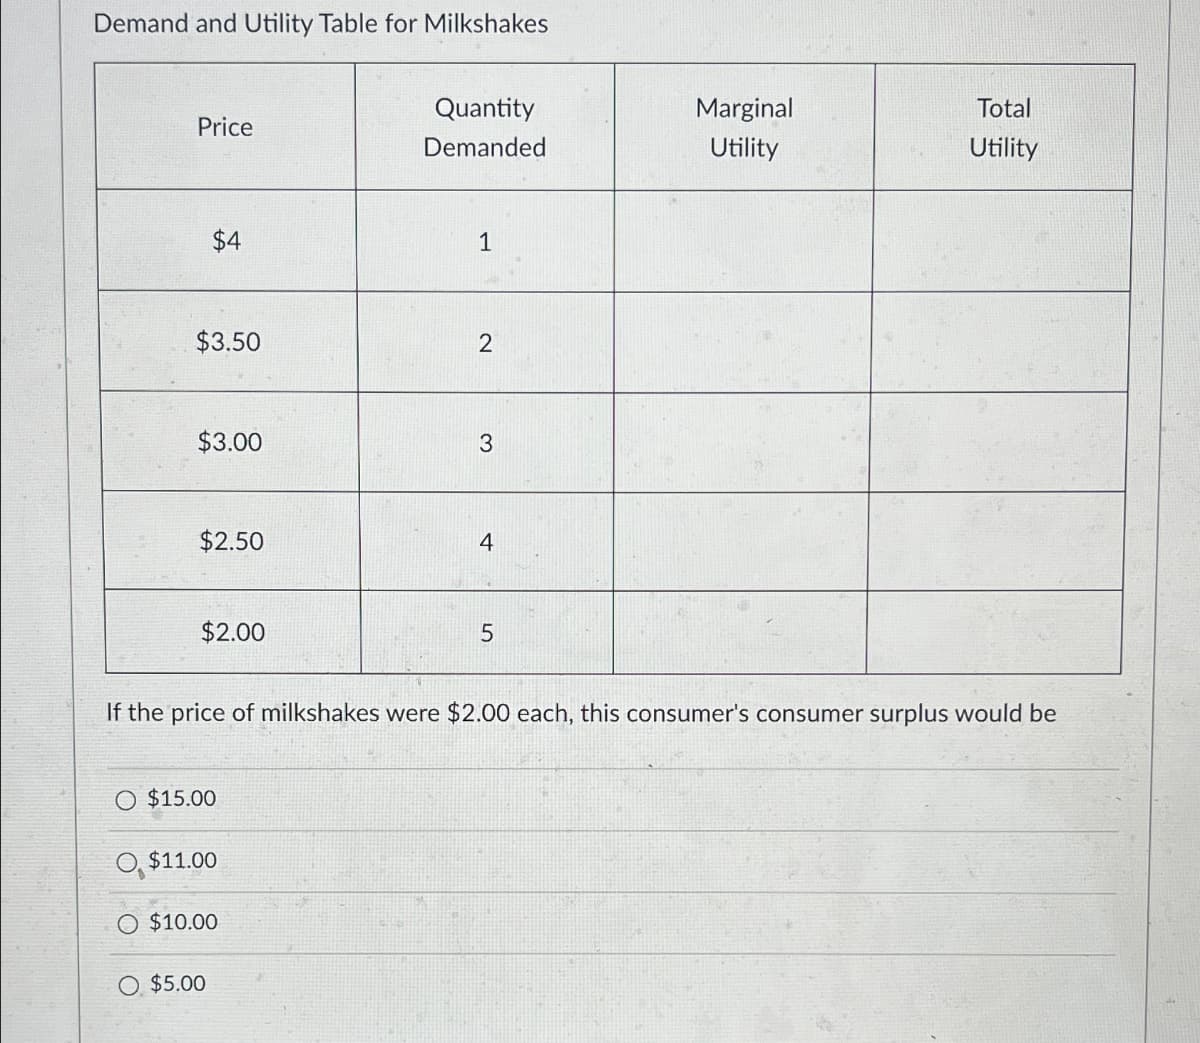 Demand and Utility Table for Milkshakes
Price
Quantity
Marginal
Total
Demanded
Utility
Utility
$4
1
$3.50
2
$3.00
3
$2.50
$2.00
4
5
If the price of milkshakes were $2.00 each, this consumer's consumer surplus would be
$15.00
O, $11.00
O $10.00
$5.00